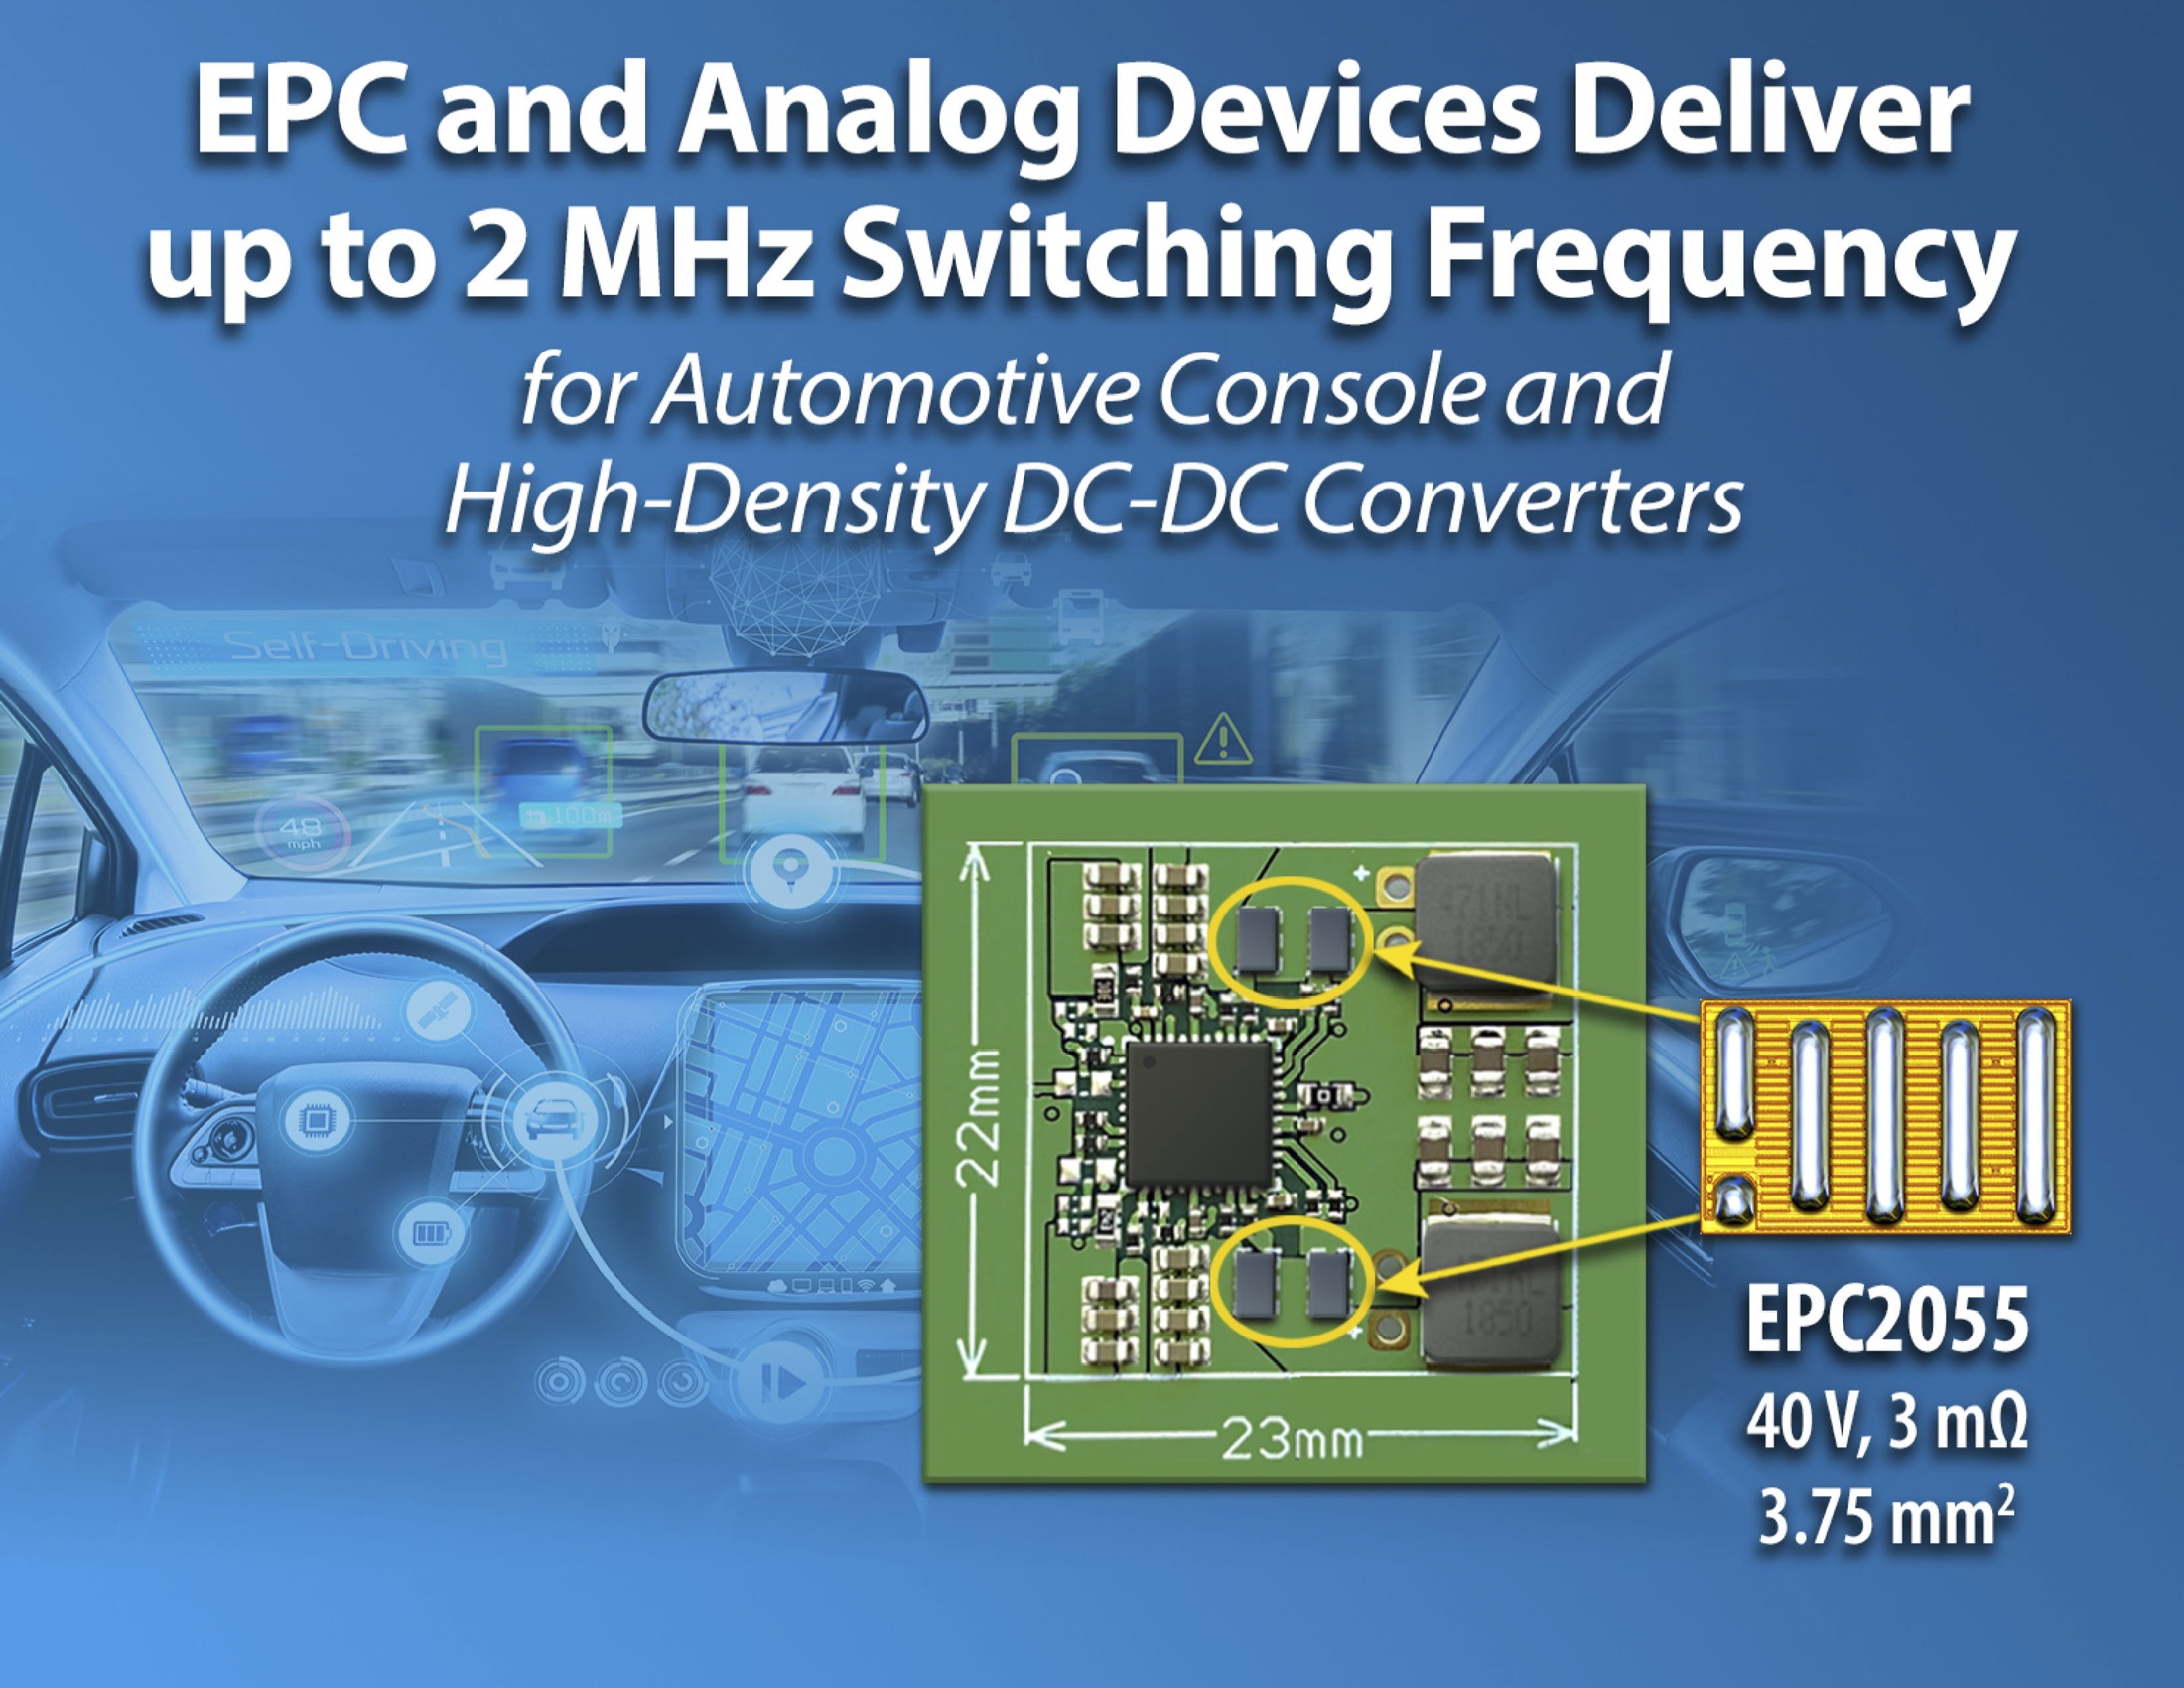 EPC, Analog Devices Deliver up to 2 MHz Switching Frequency for the Highest Density DC-DC Converters Using GaN FETs